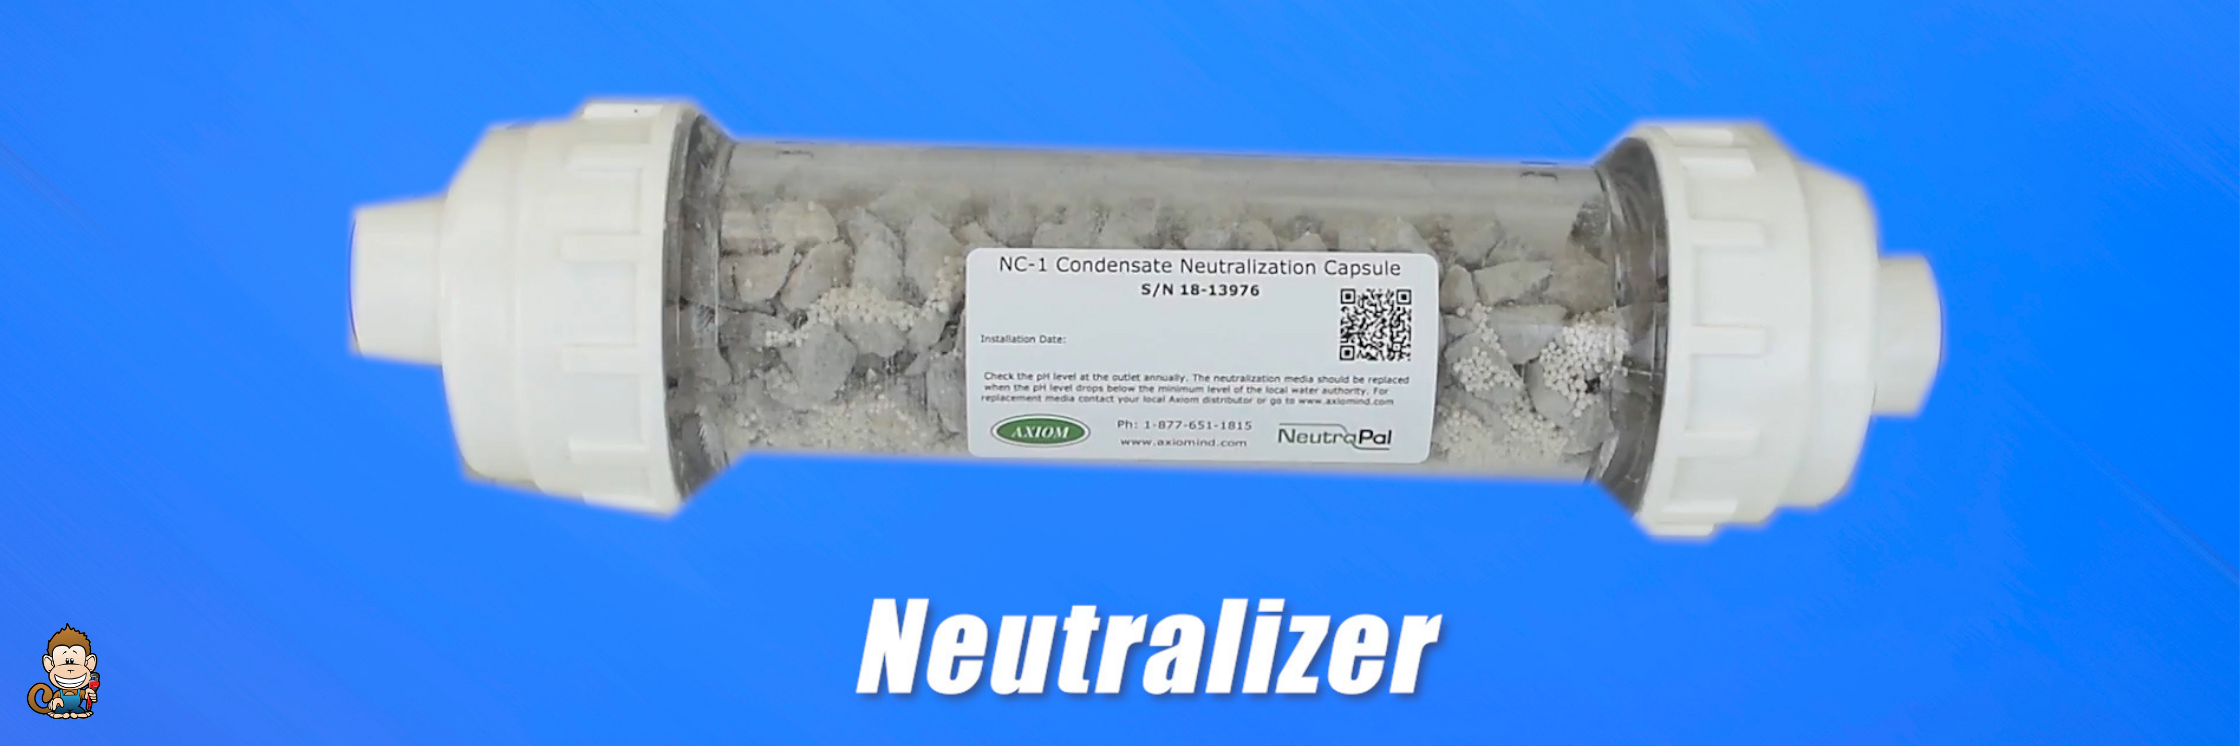 What is a Neutralizer?